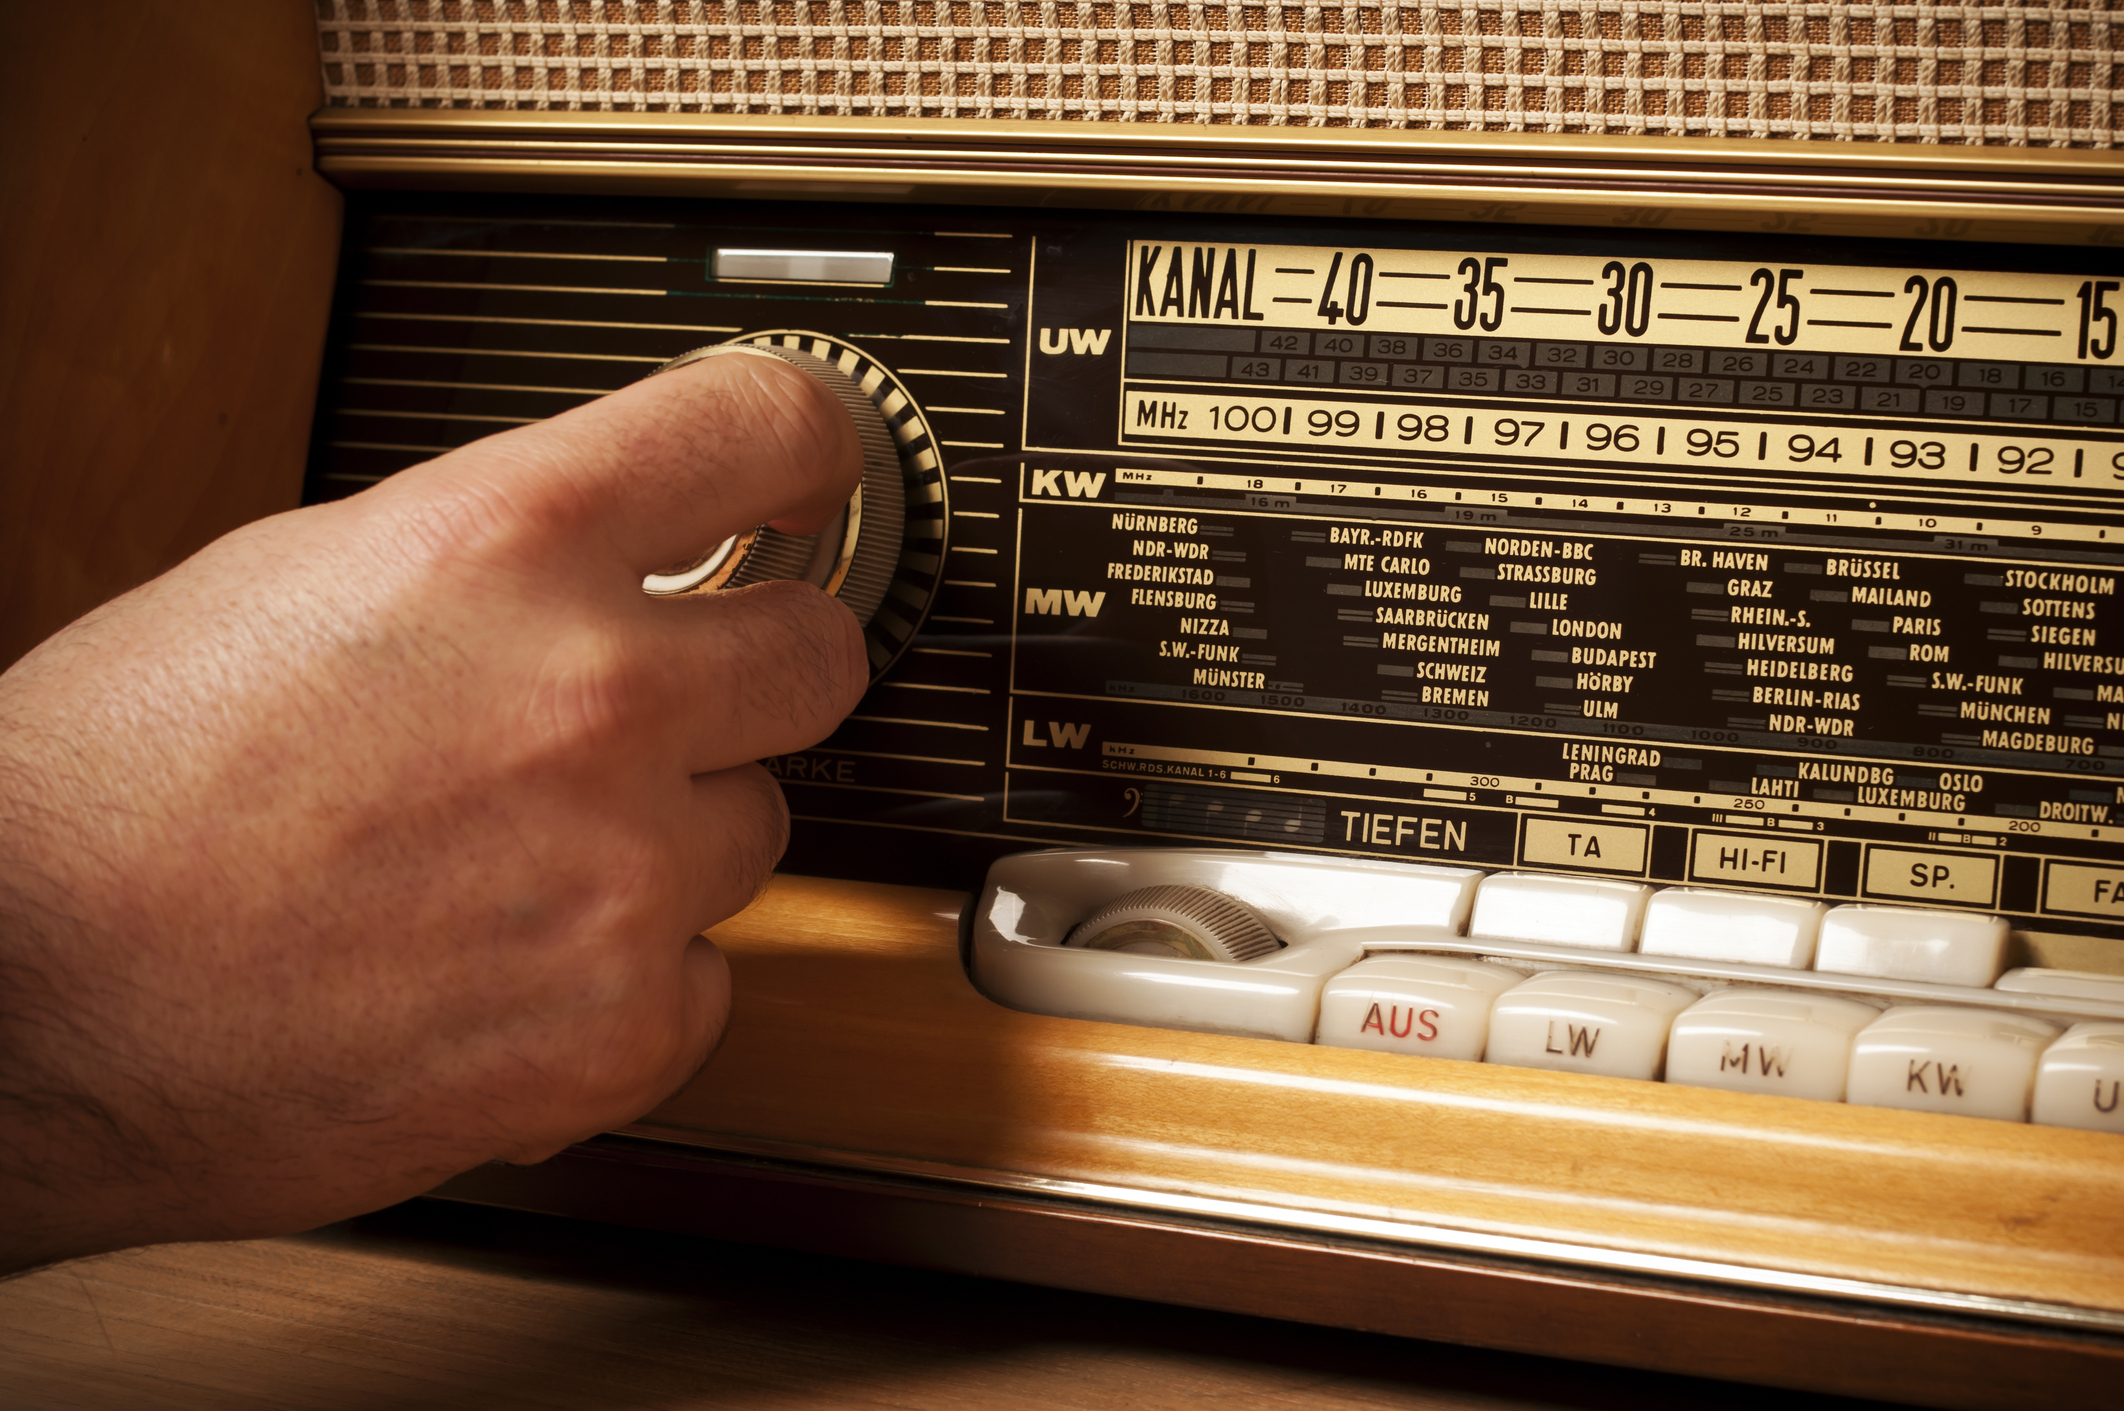 A person is finding a station on an old-school radio with a knob